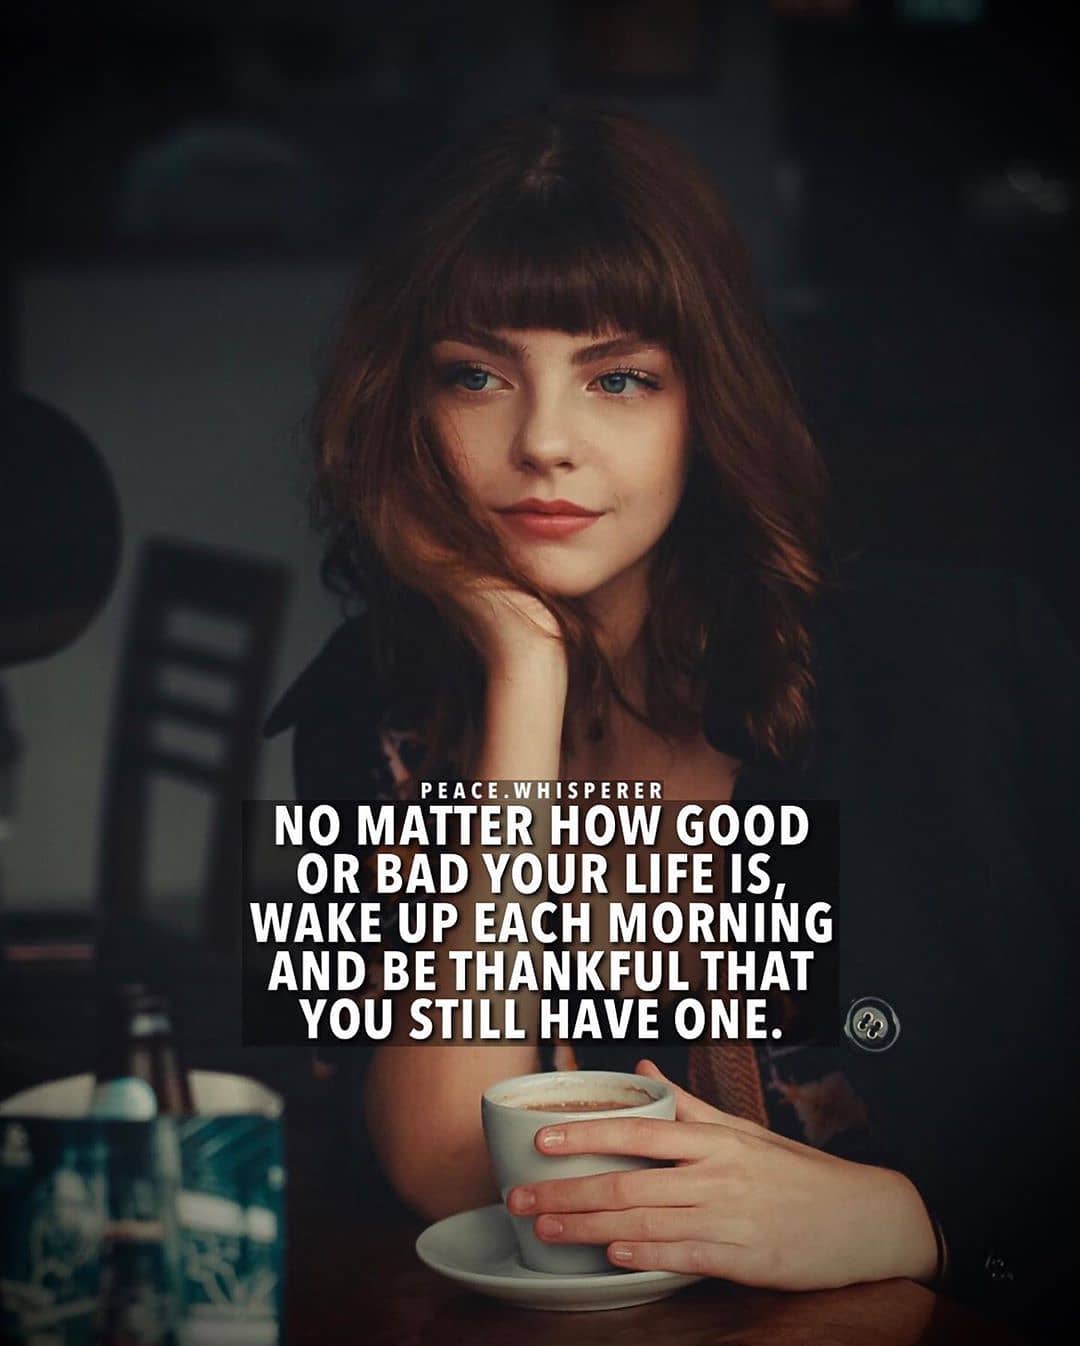 No matter how good or bad your life is, wake up each morning and be thankful that you still have one.